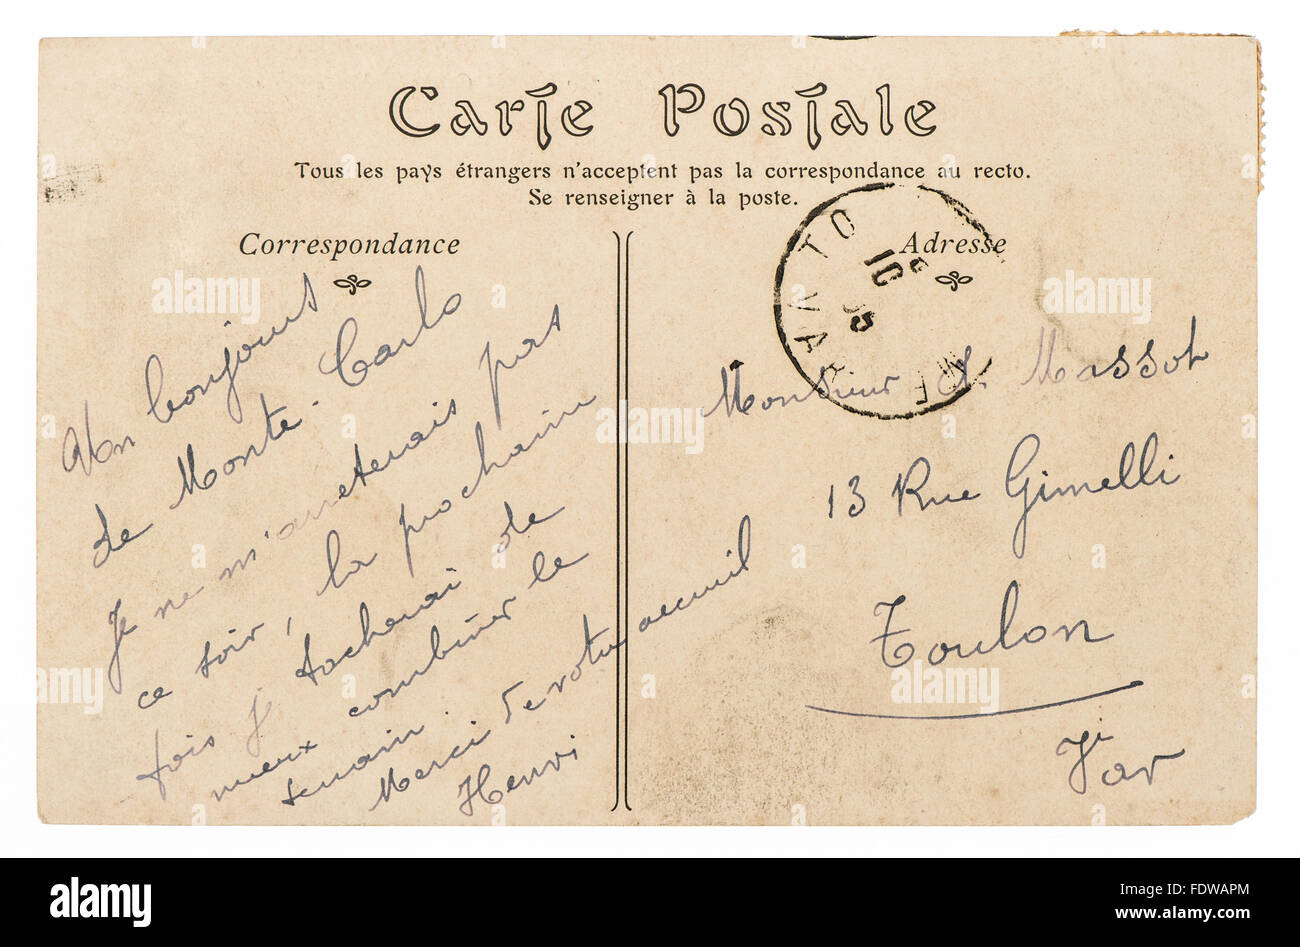 Vintage handwritten postcard mail with unreadable undefined text. Used paper texture Stock Photo